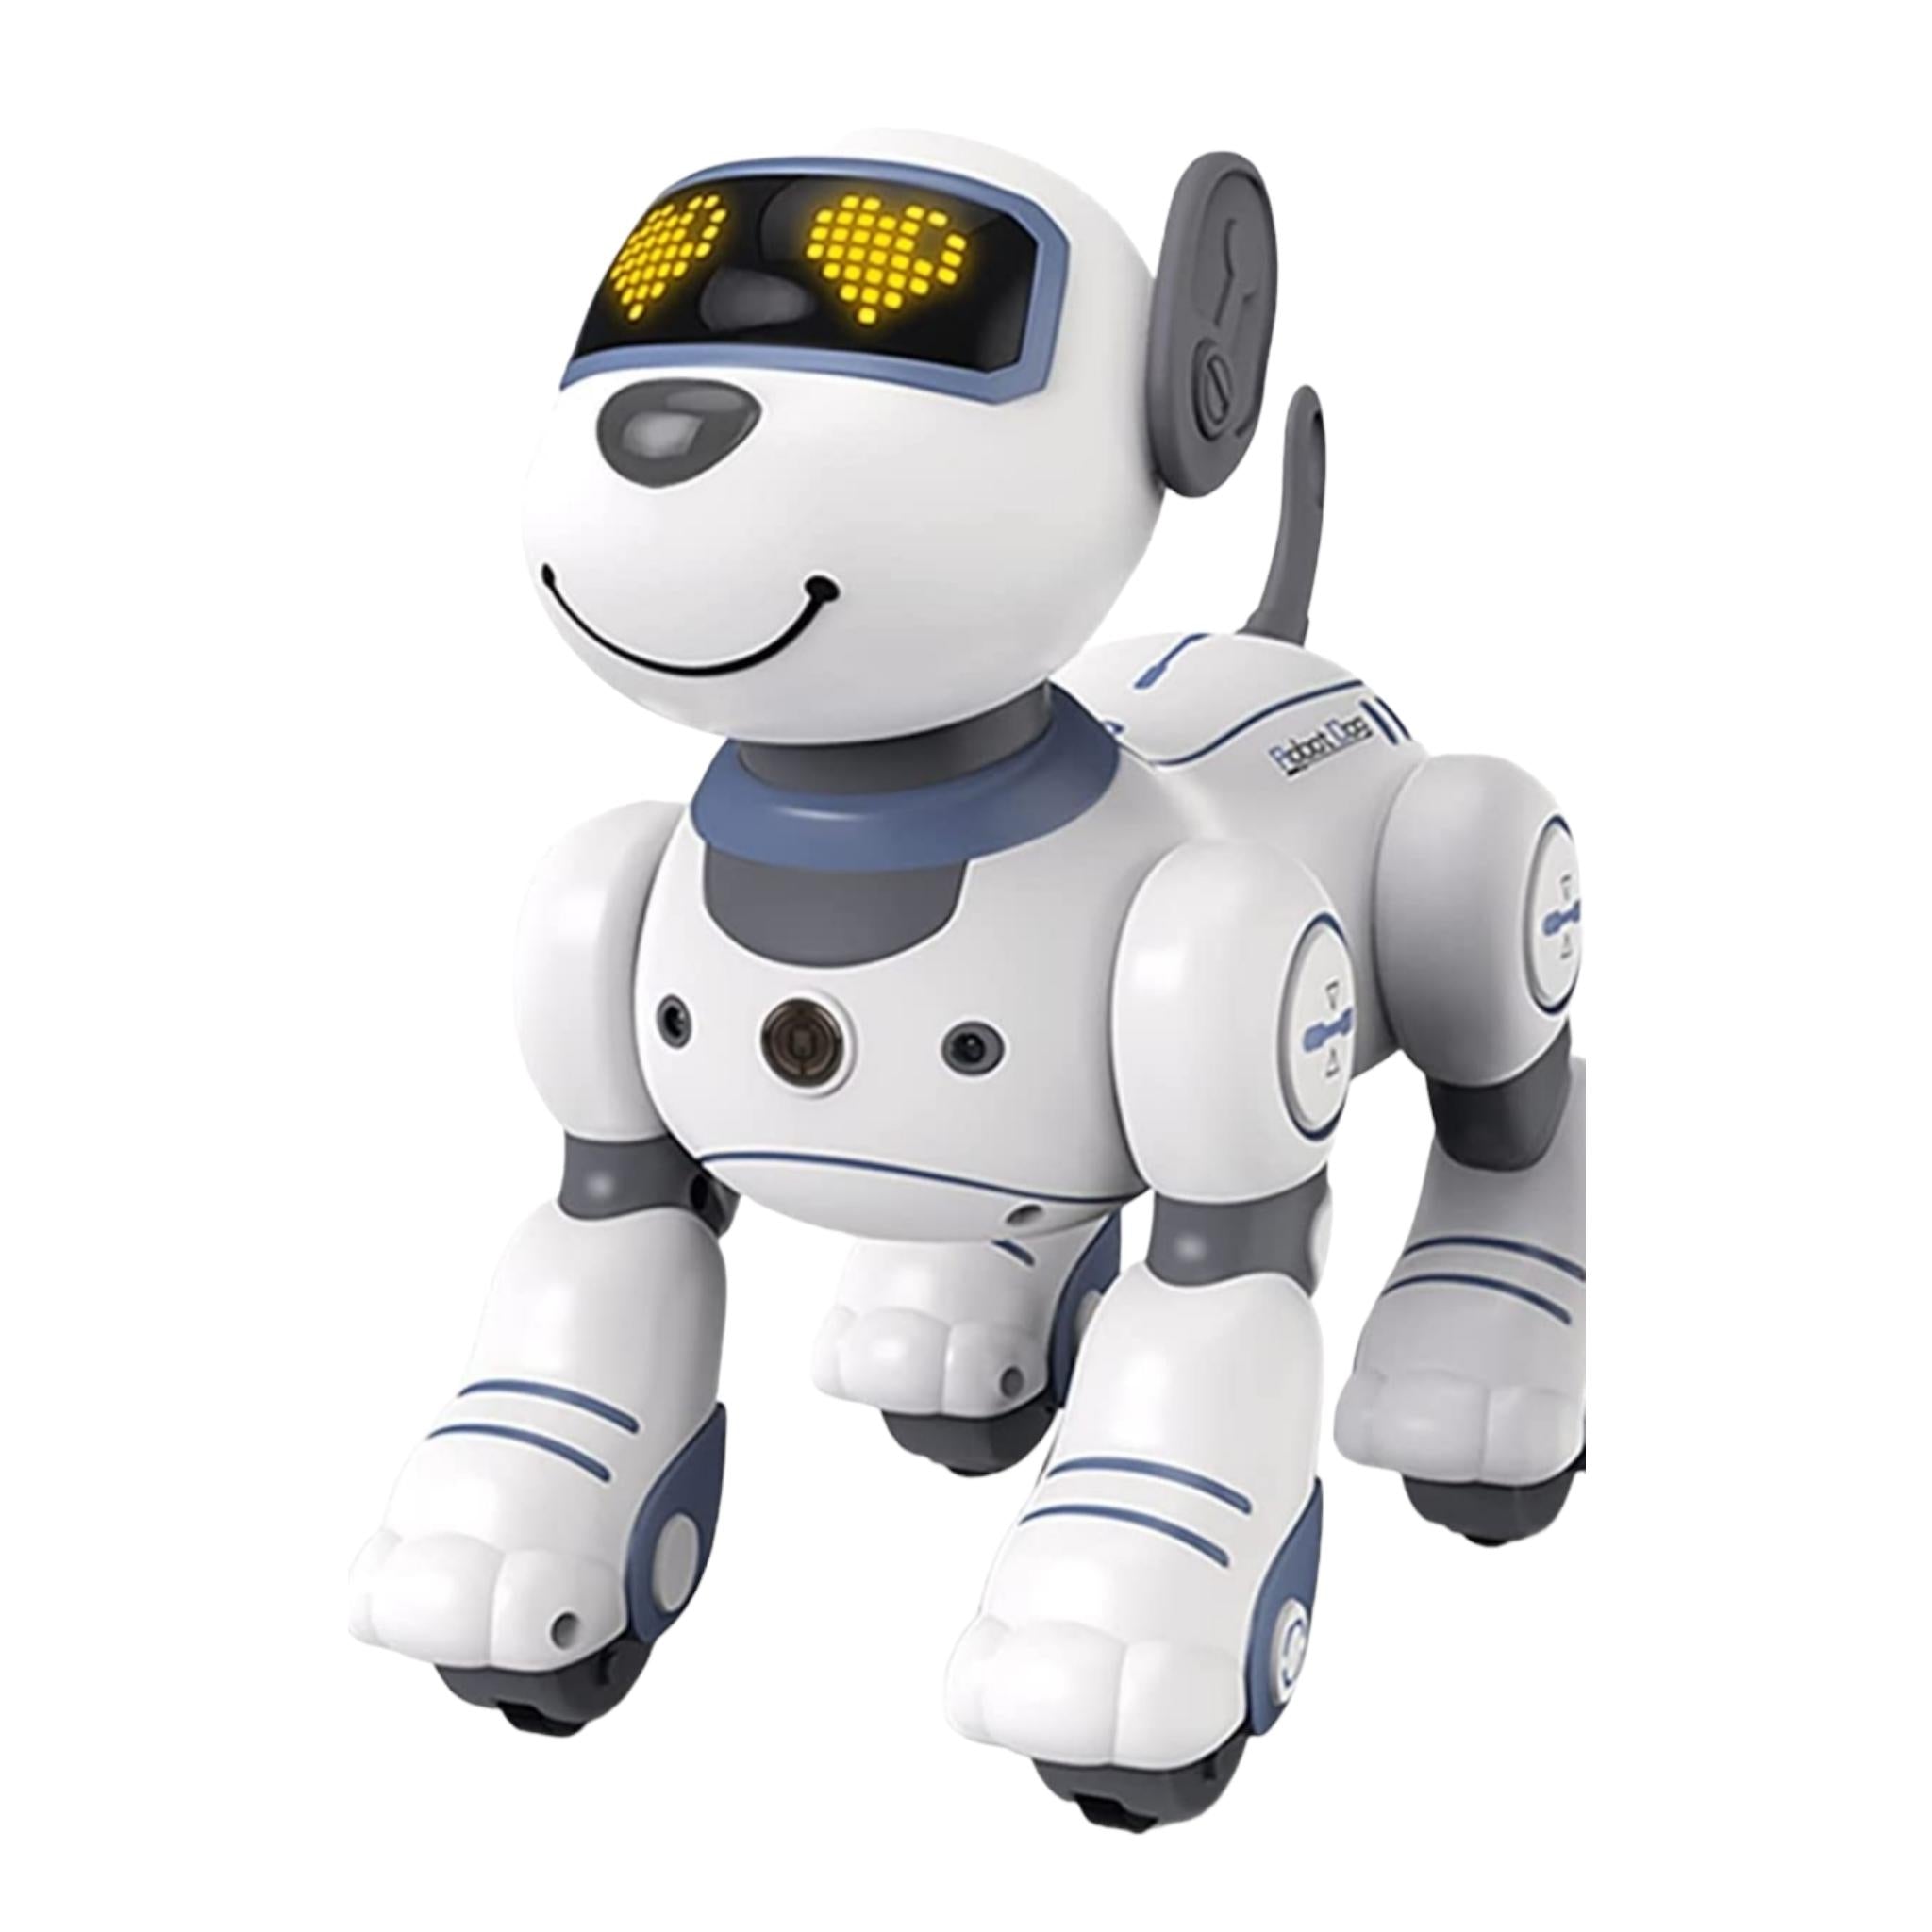 GN Universe Smart Dachshund Dog Robot Toy for Boys and Girls Toddlers and Kids Gesture Sensing and Body Twisting